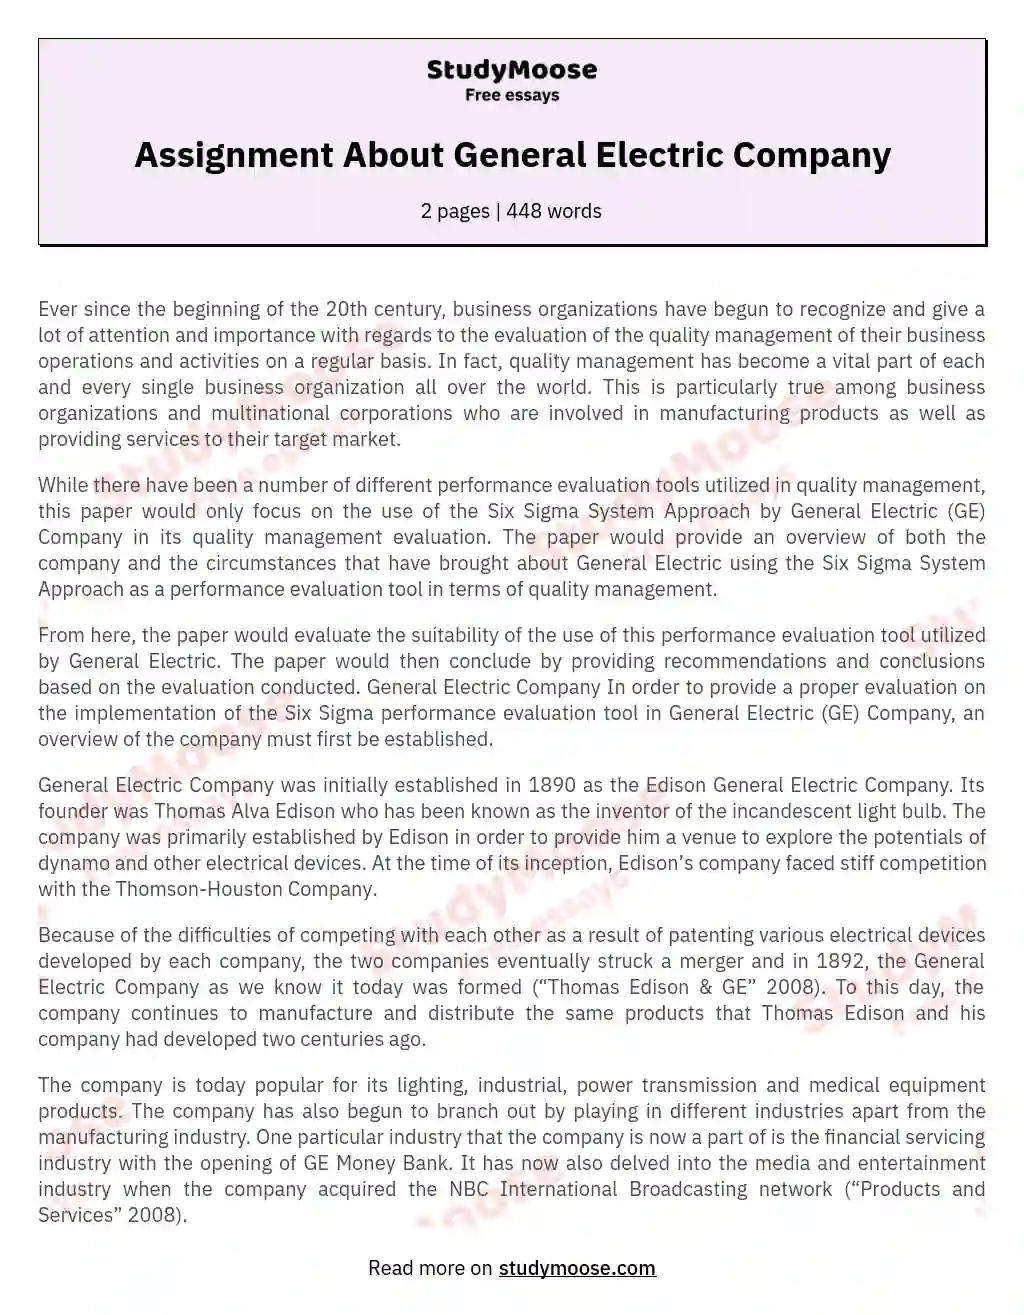 Assignment About General Electric Company essay